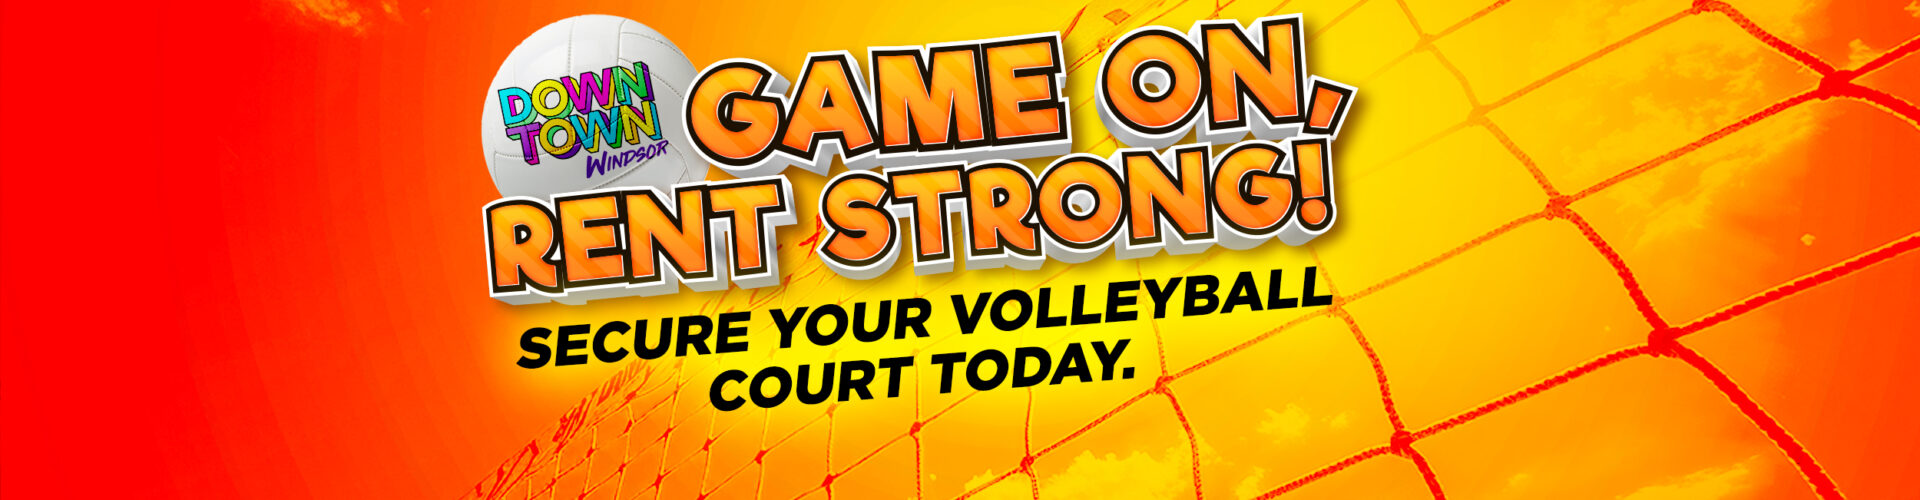 Game on, rent strong! Secure your volleyball court today.